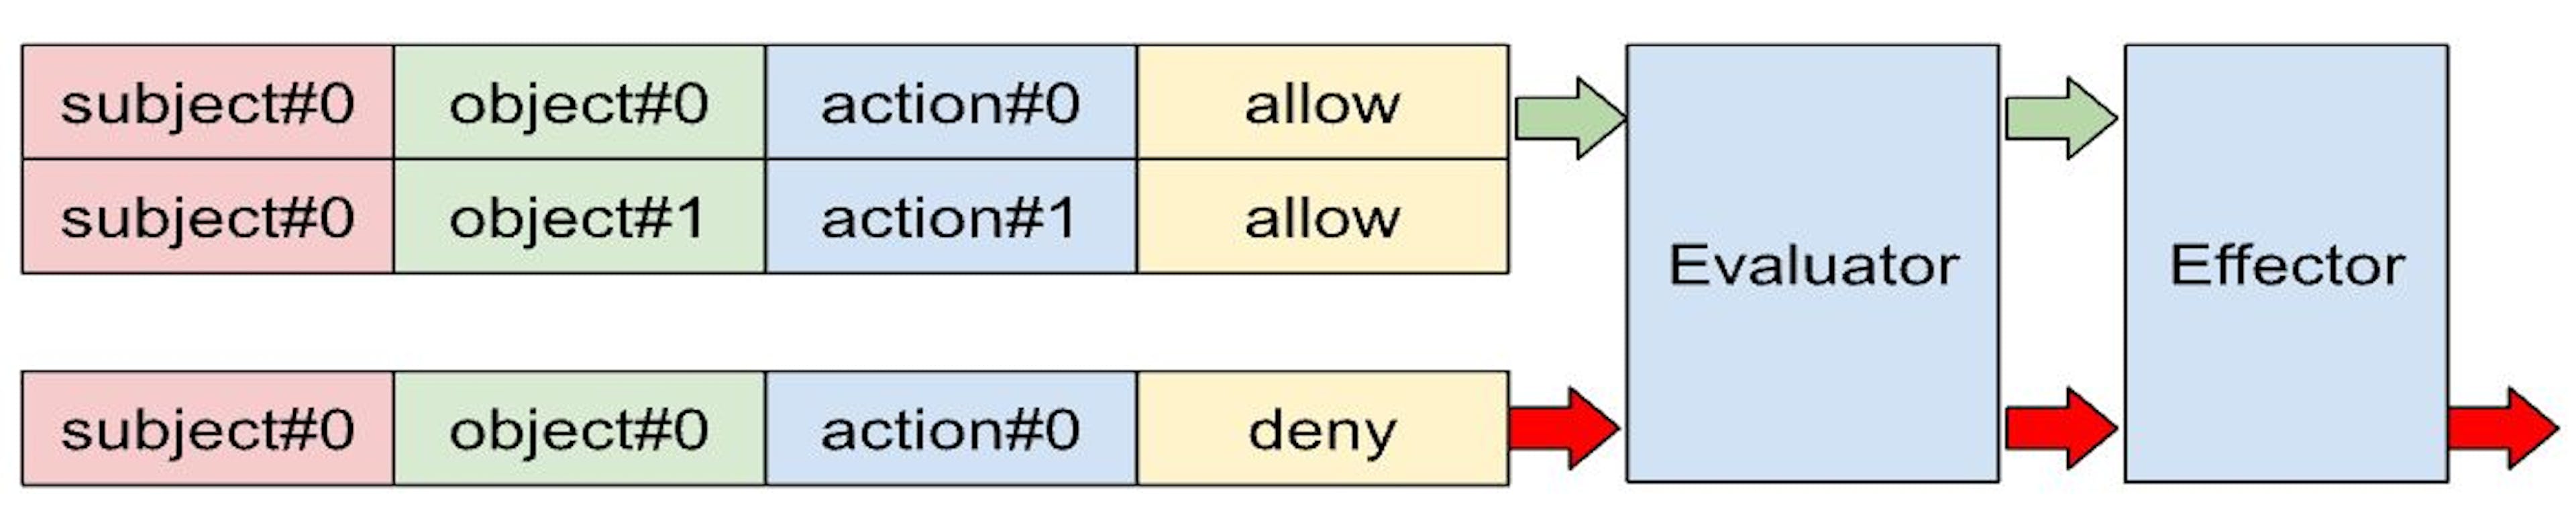 Picture 5. Allow / deny effector